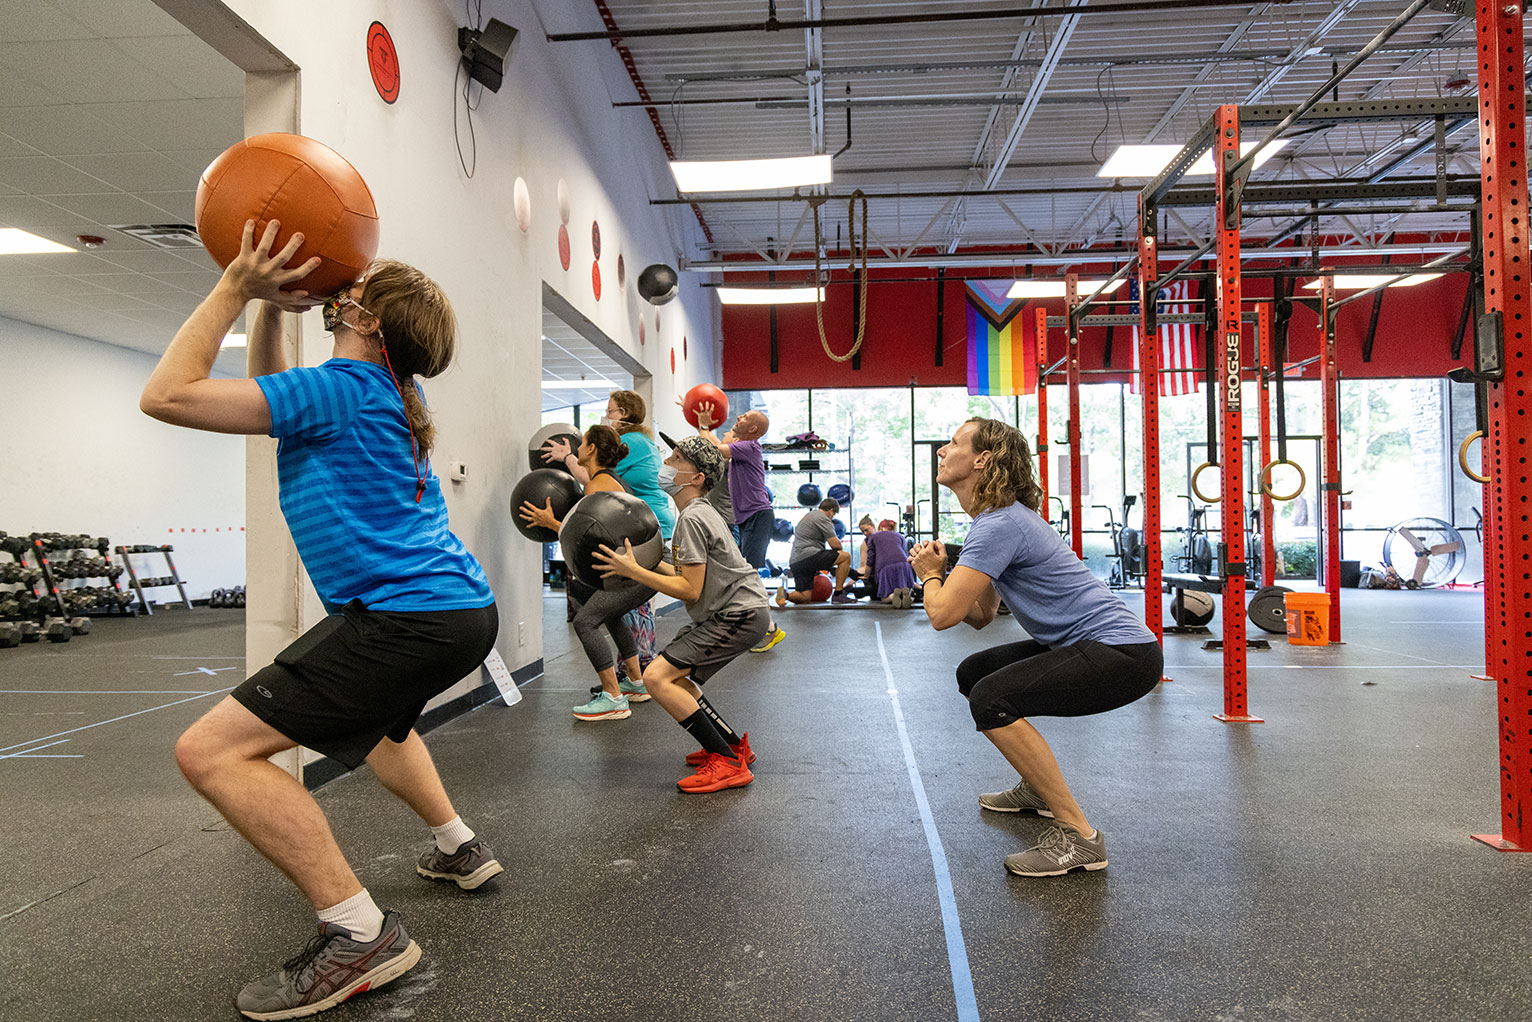 Athletes throw balls at the wall in a gym